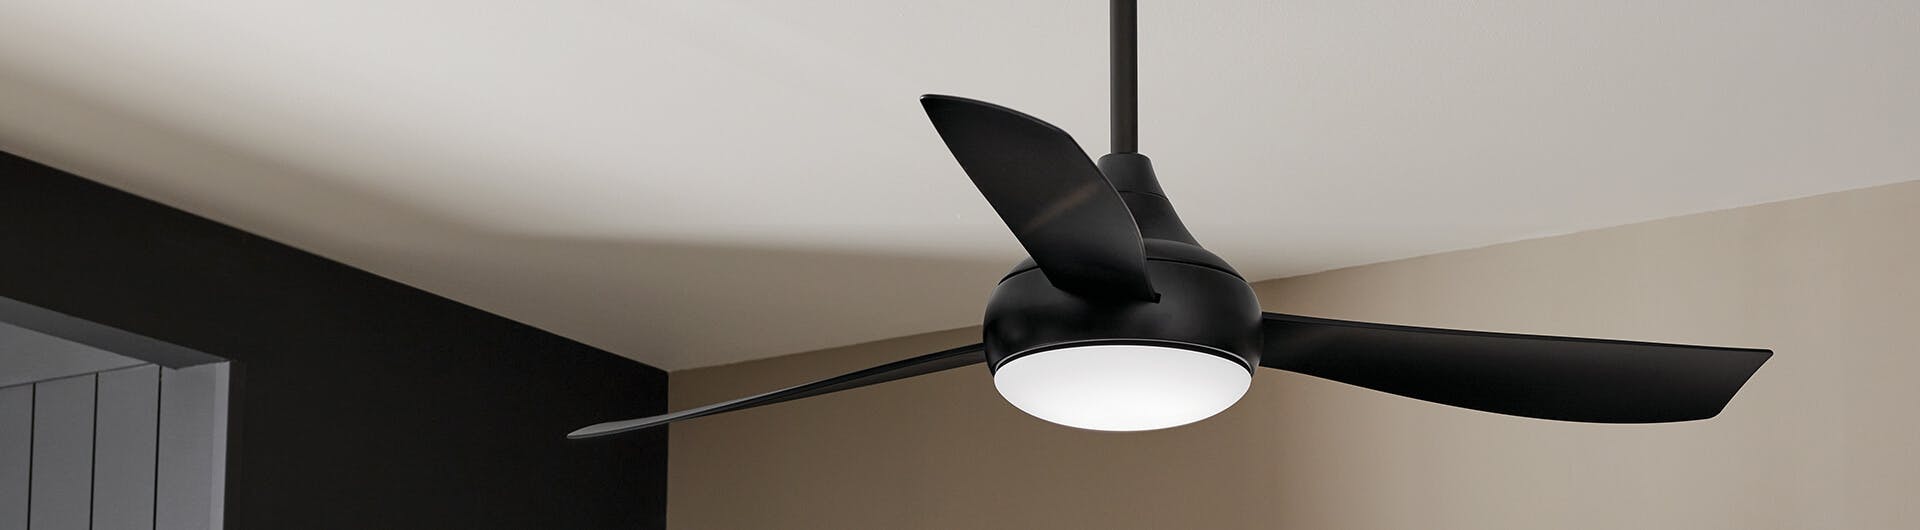 Close-up of an Ample ceiling fan mounted in an indoor space